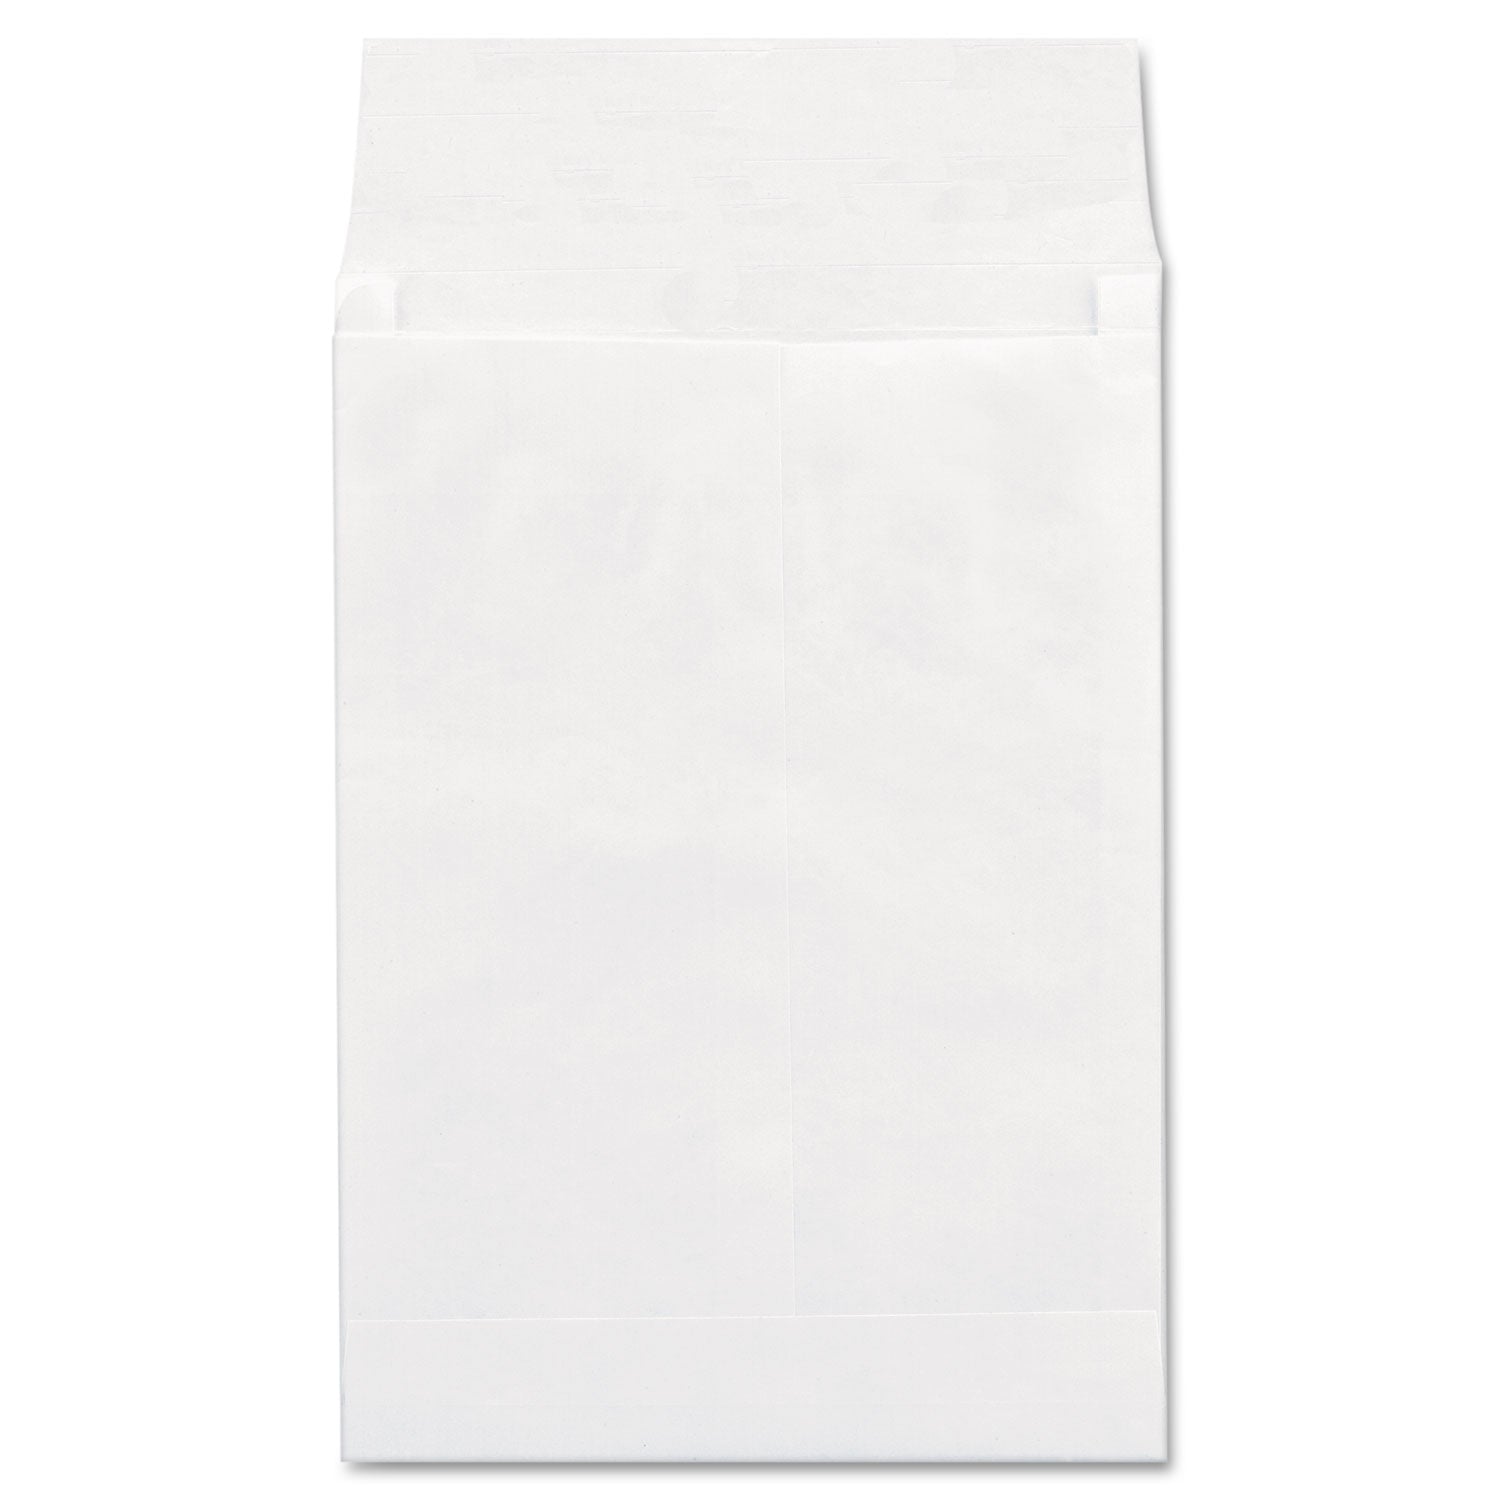 Deluxe Tyvek Expansion Envelopes, Open-End, 1.5" Capacity, #13 1/2, Square Flap, Self-Adhesive Closure, 10 x 13, White,100/BX - 